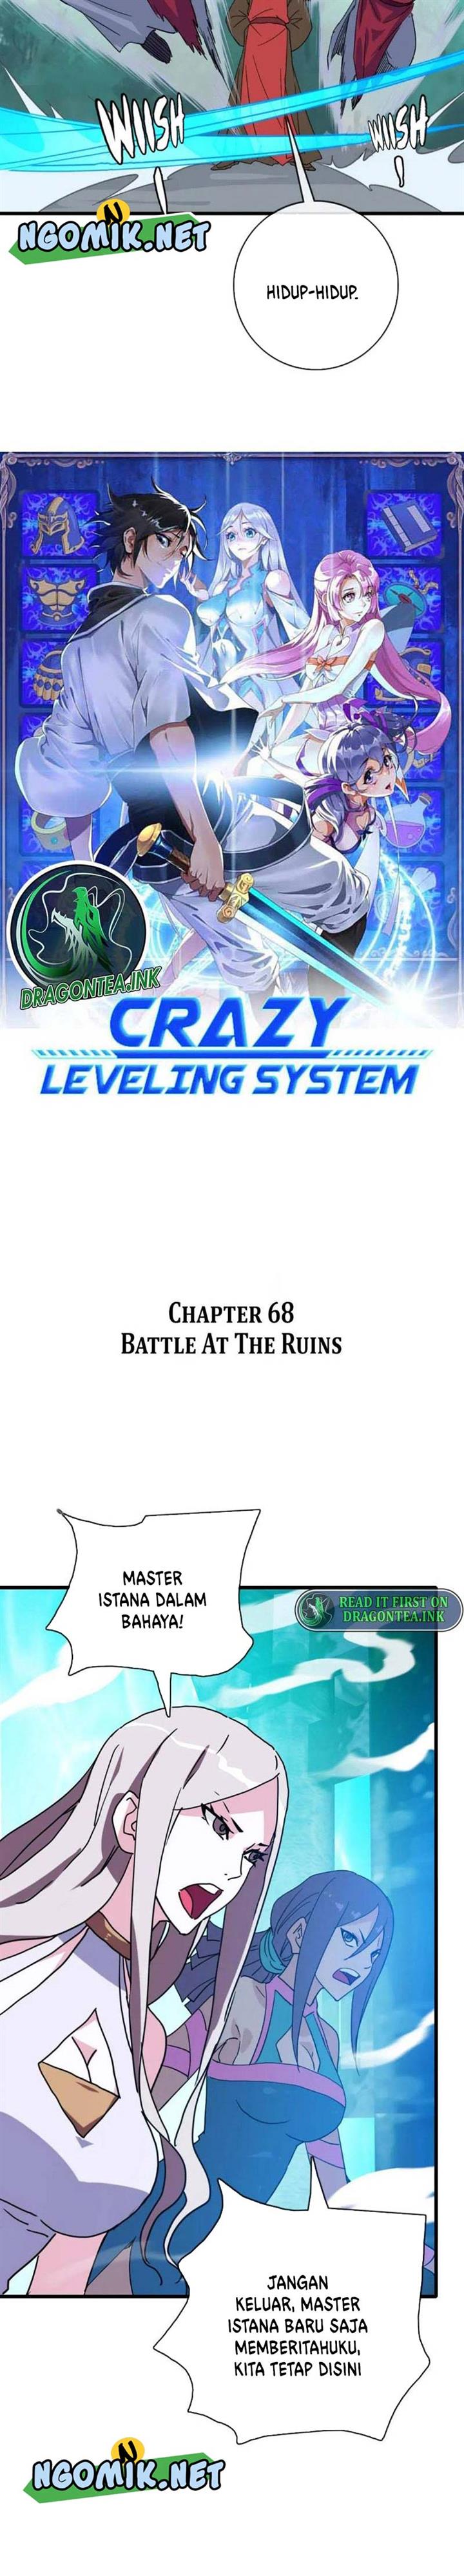 Crazy Leveling System Chapter 68